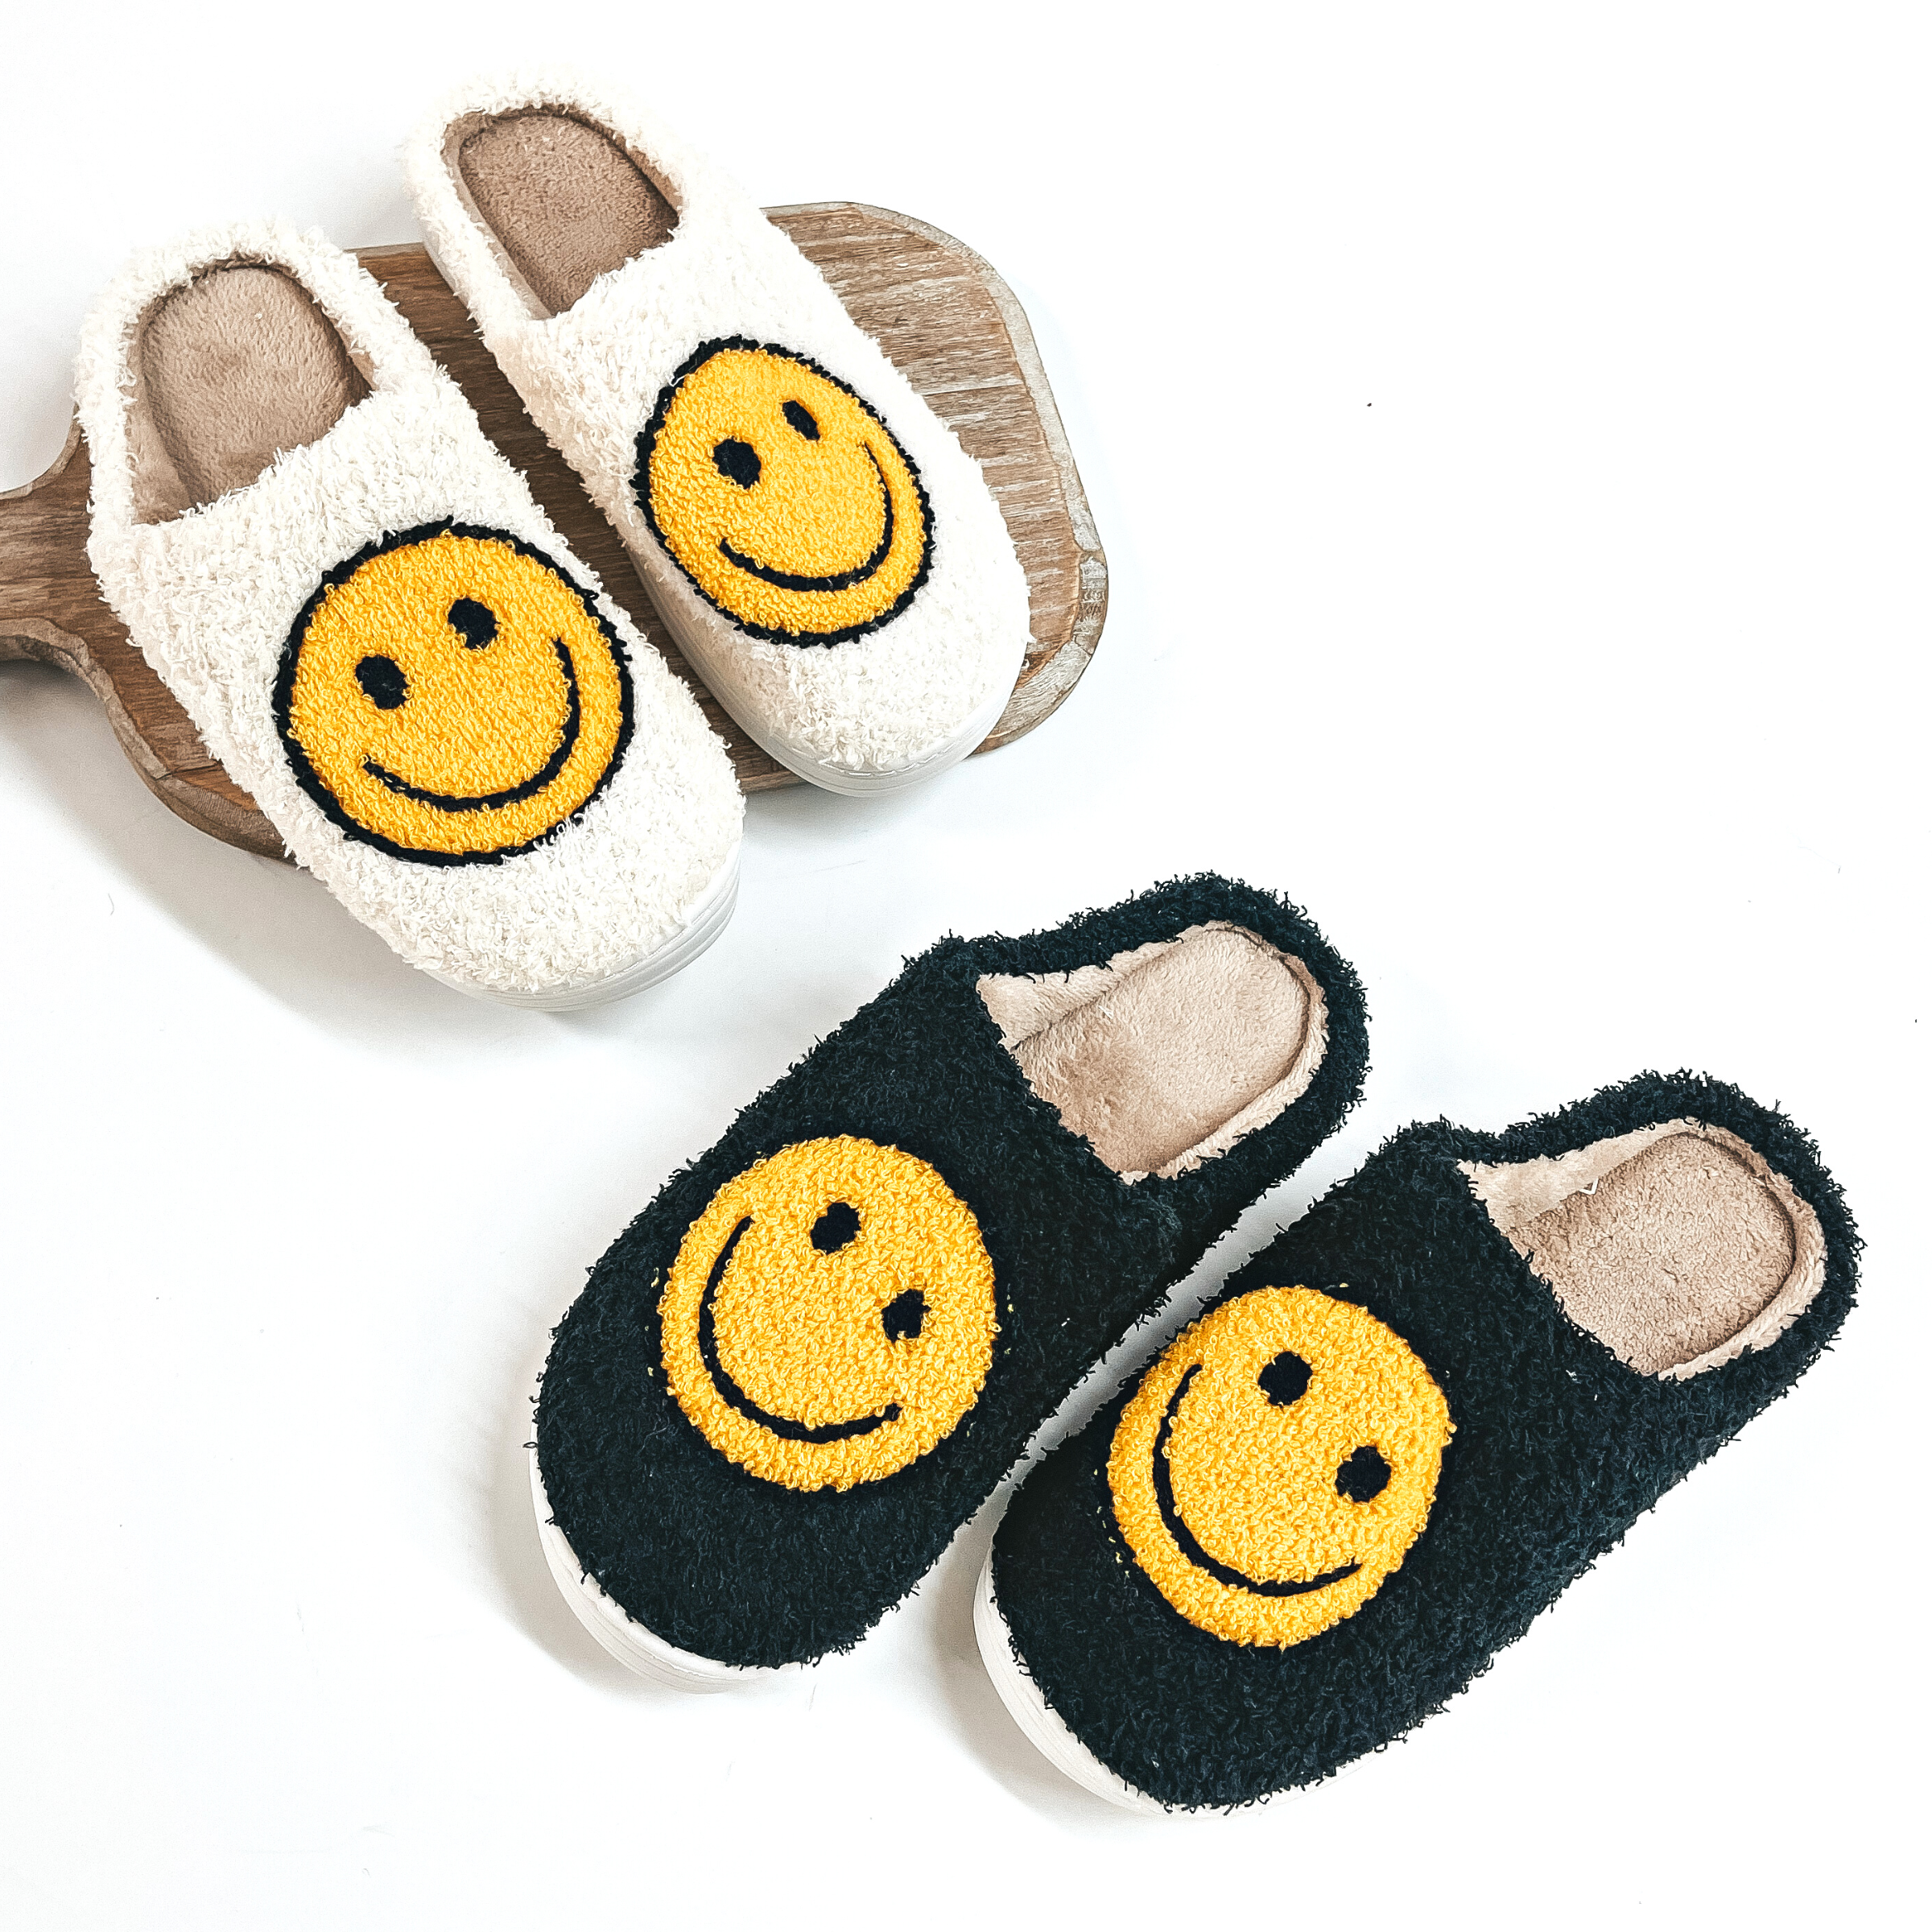 There are two pairs of sherpa happy face slippers in ivory and black, both have  brown inner soles. The ivory slippers are placed on a wooden slab and the  black pair is on a white background.